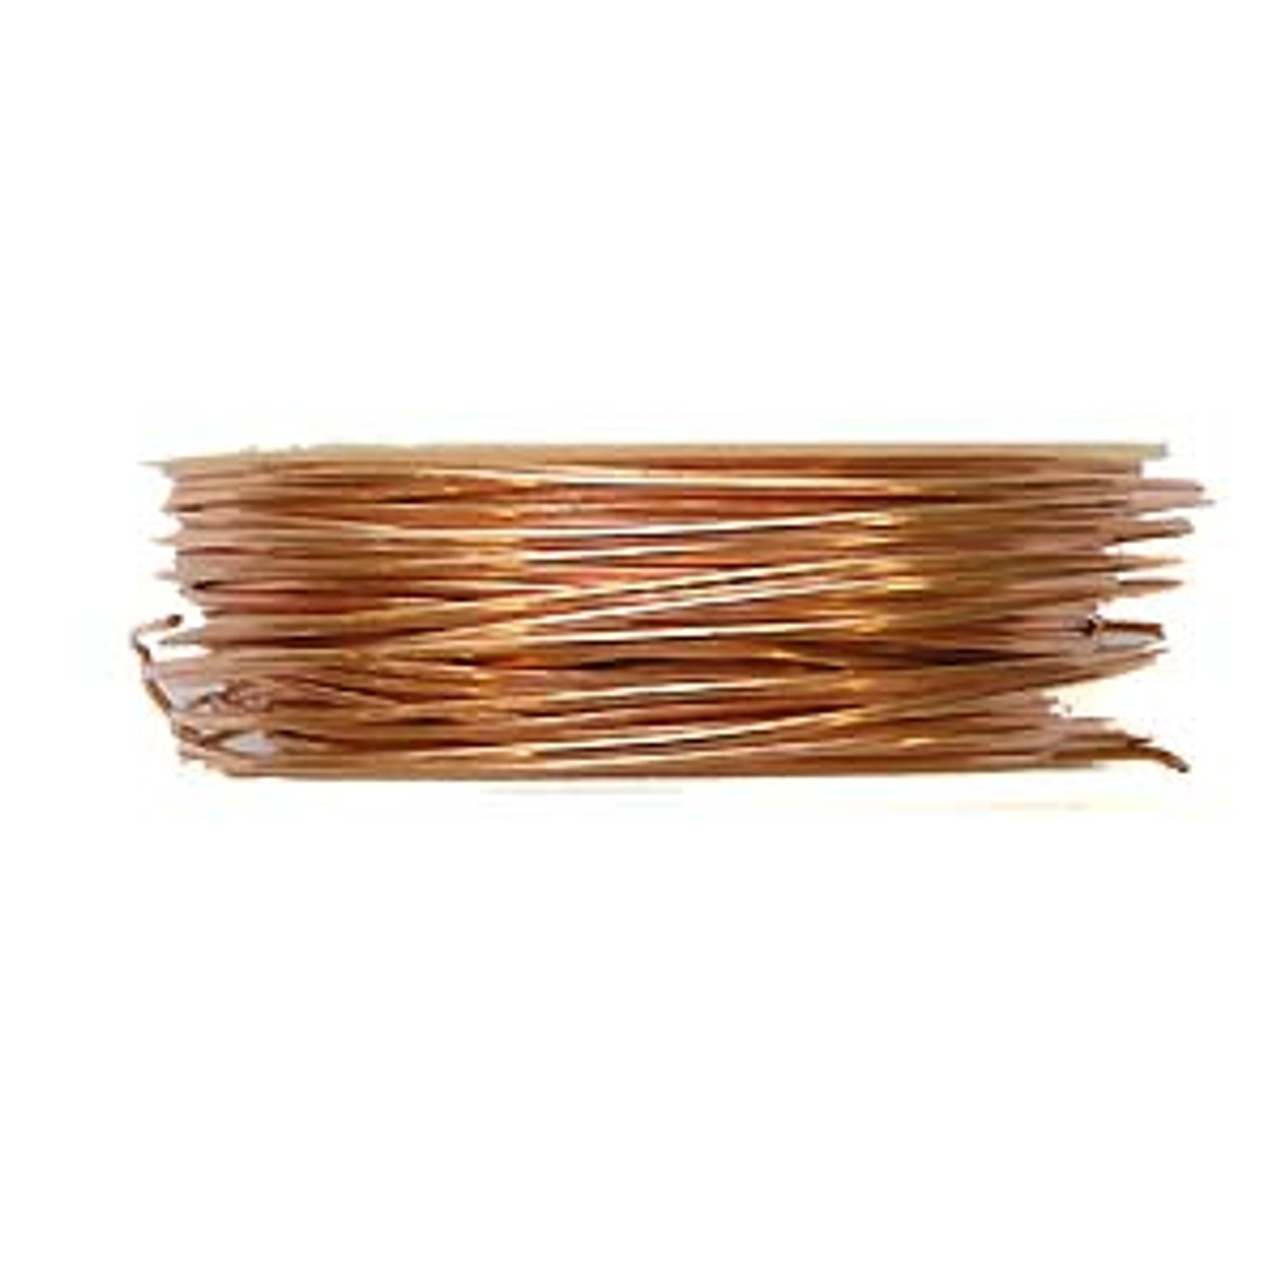 4 oz Solid Copper Wire 16 Gauge 31.5 ft roll 